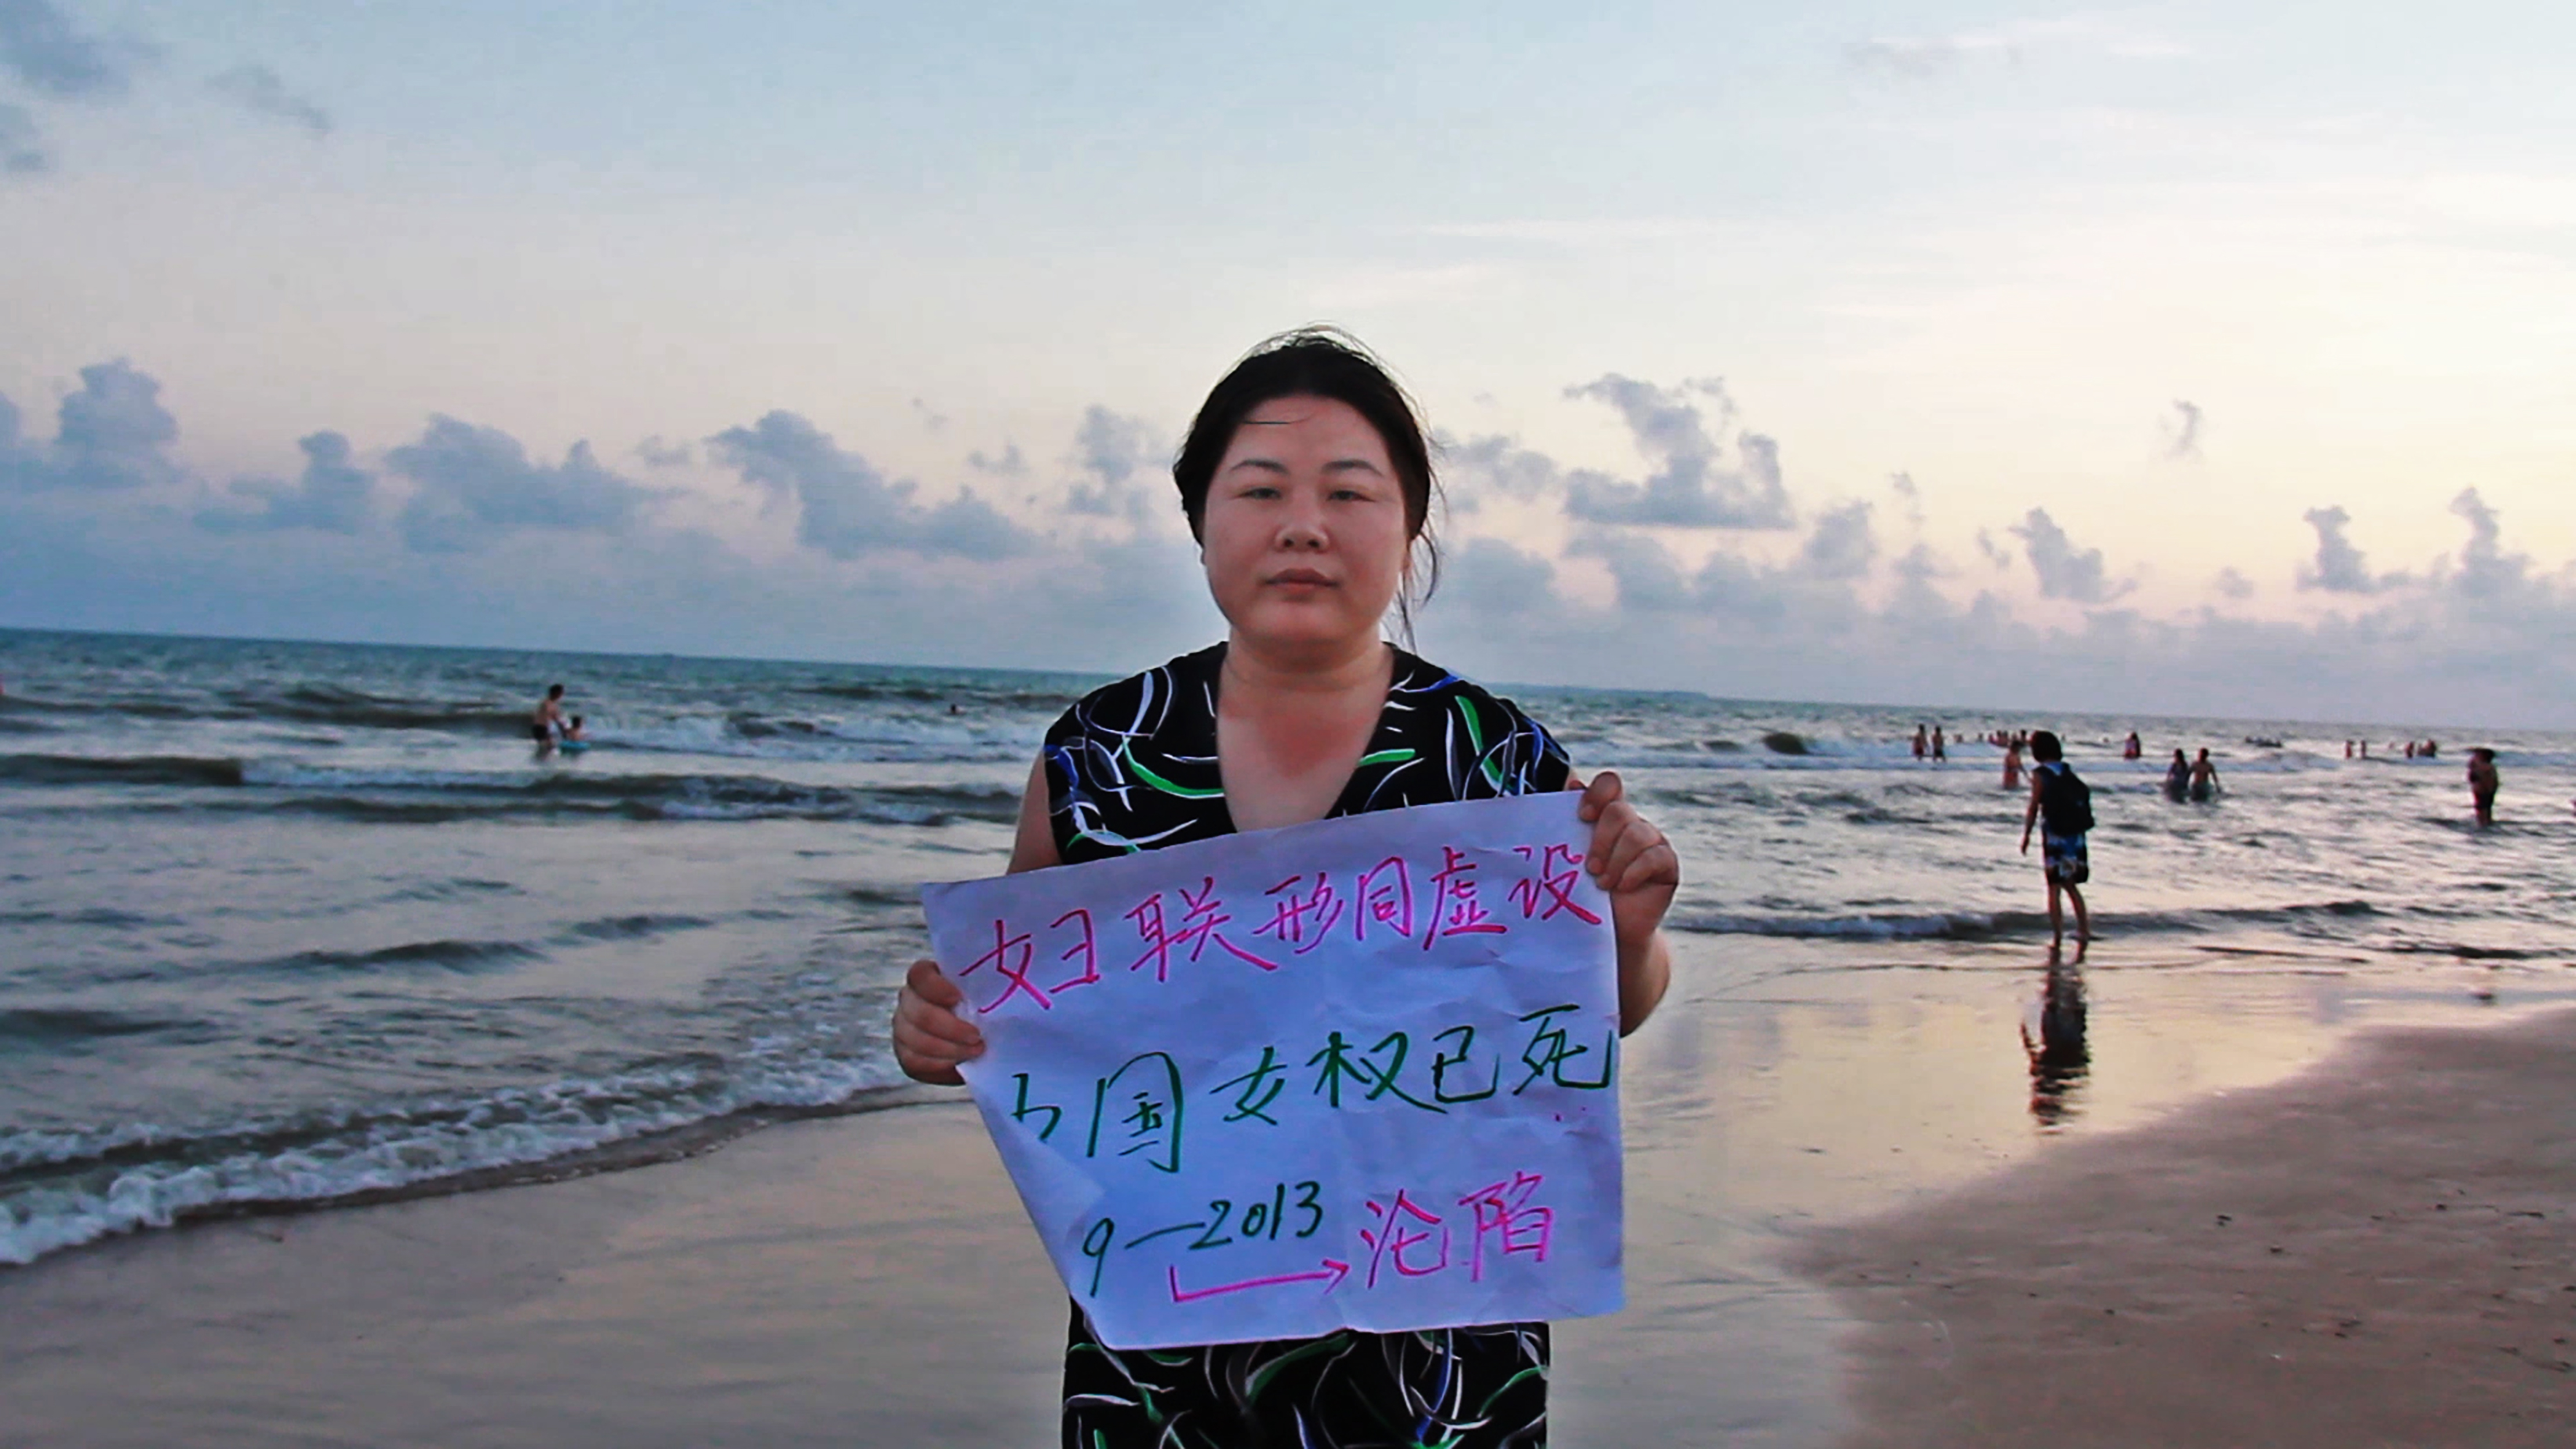 Still image from Nanfu Wang’s "Hooligan Sparrow." Ye Haiyan, a fair complexioned adult with black hair, stands at the beach wearing a black dress with blue, green, and white designs. She is holding a sign with simplified Chinese characters.